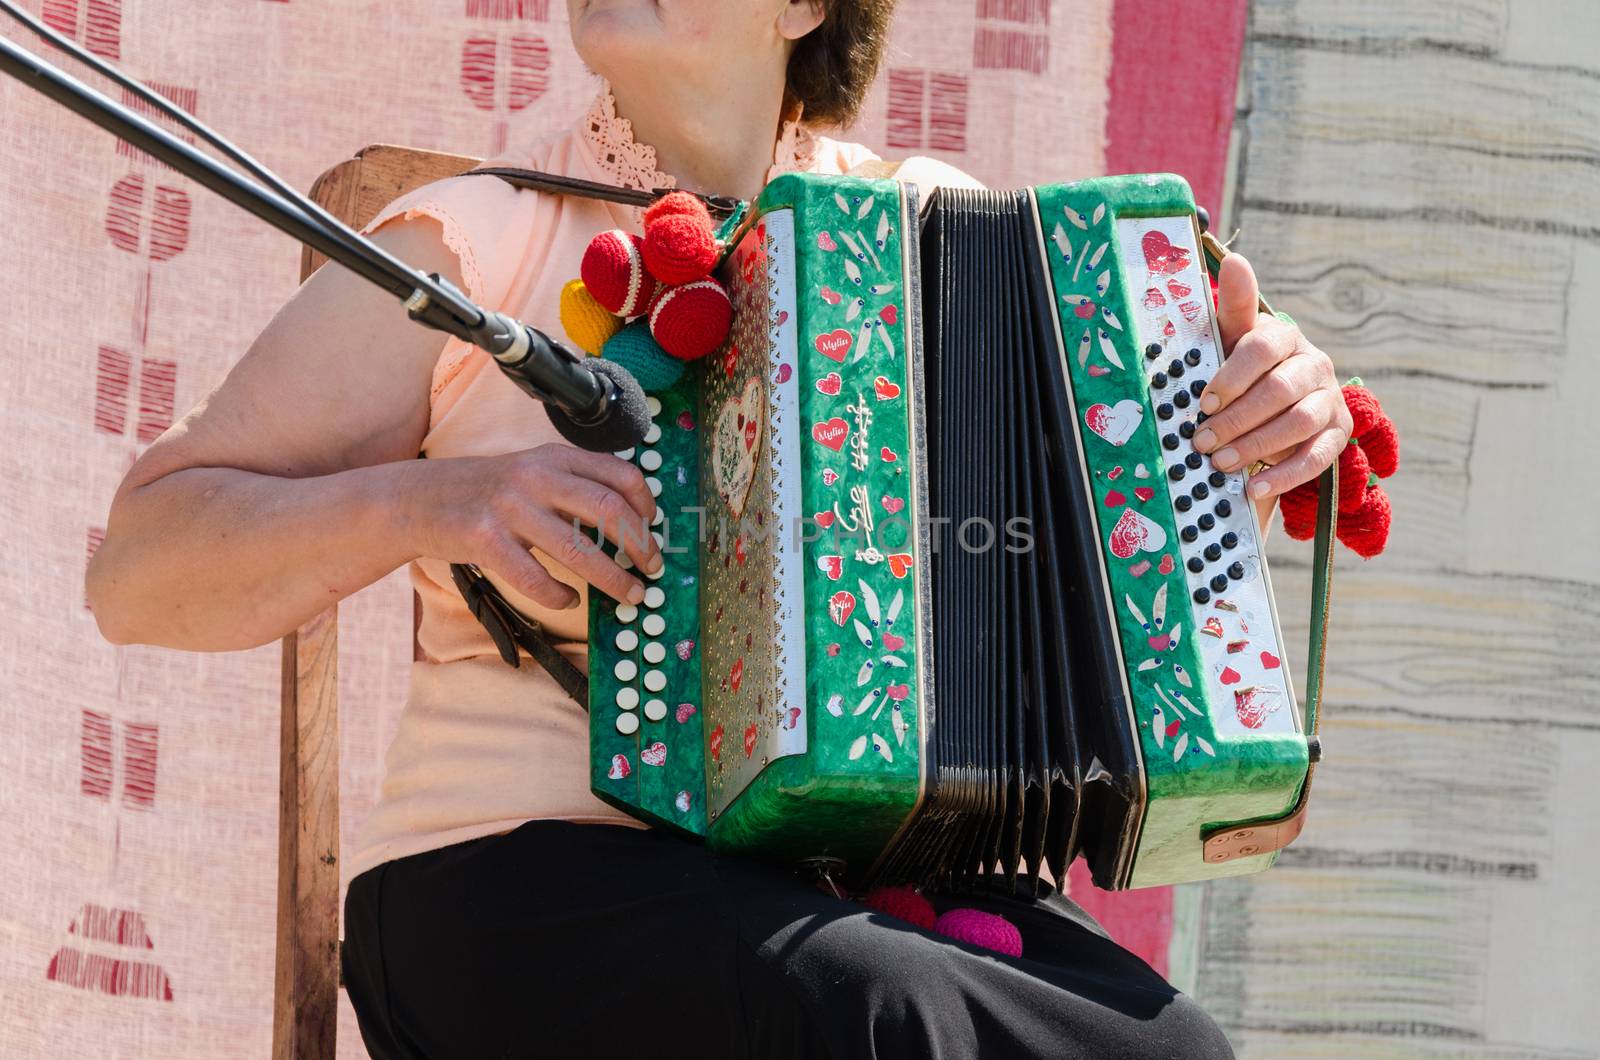 BIRZAI, LITHUANIA - JUNE 08: the woman musician at the microphone in chair fast finger movements stamp accordion buttons on June 08, 2013 in Birzai.